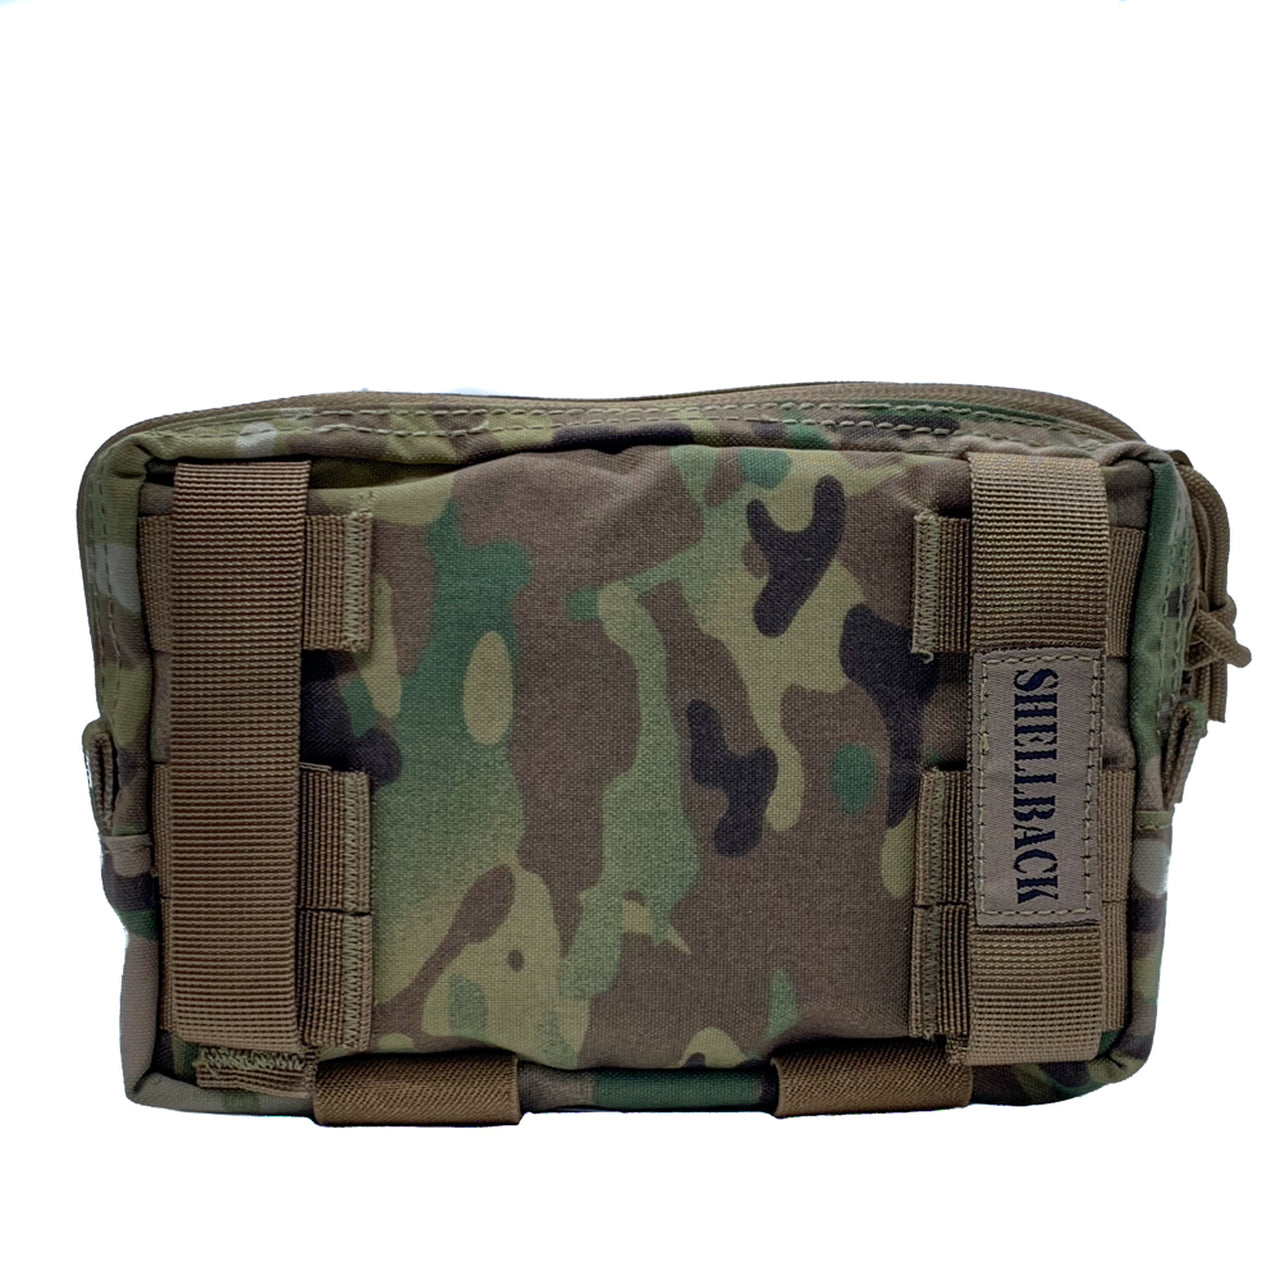 A Shellback Tactical Super Admin Pouch on a white background.